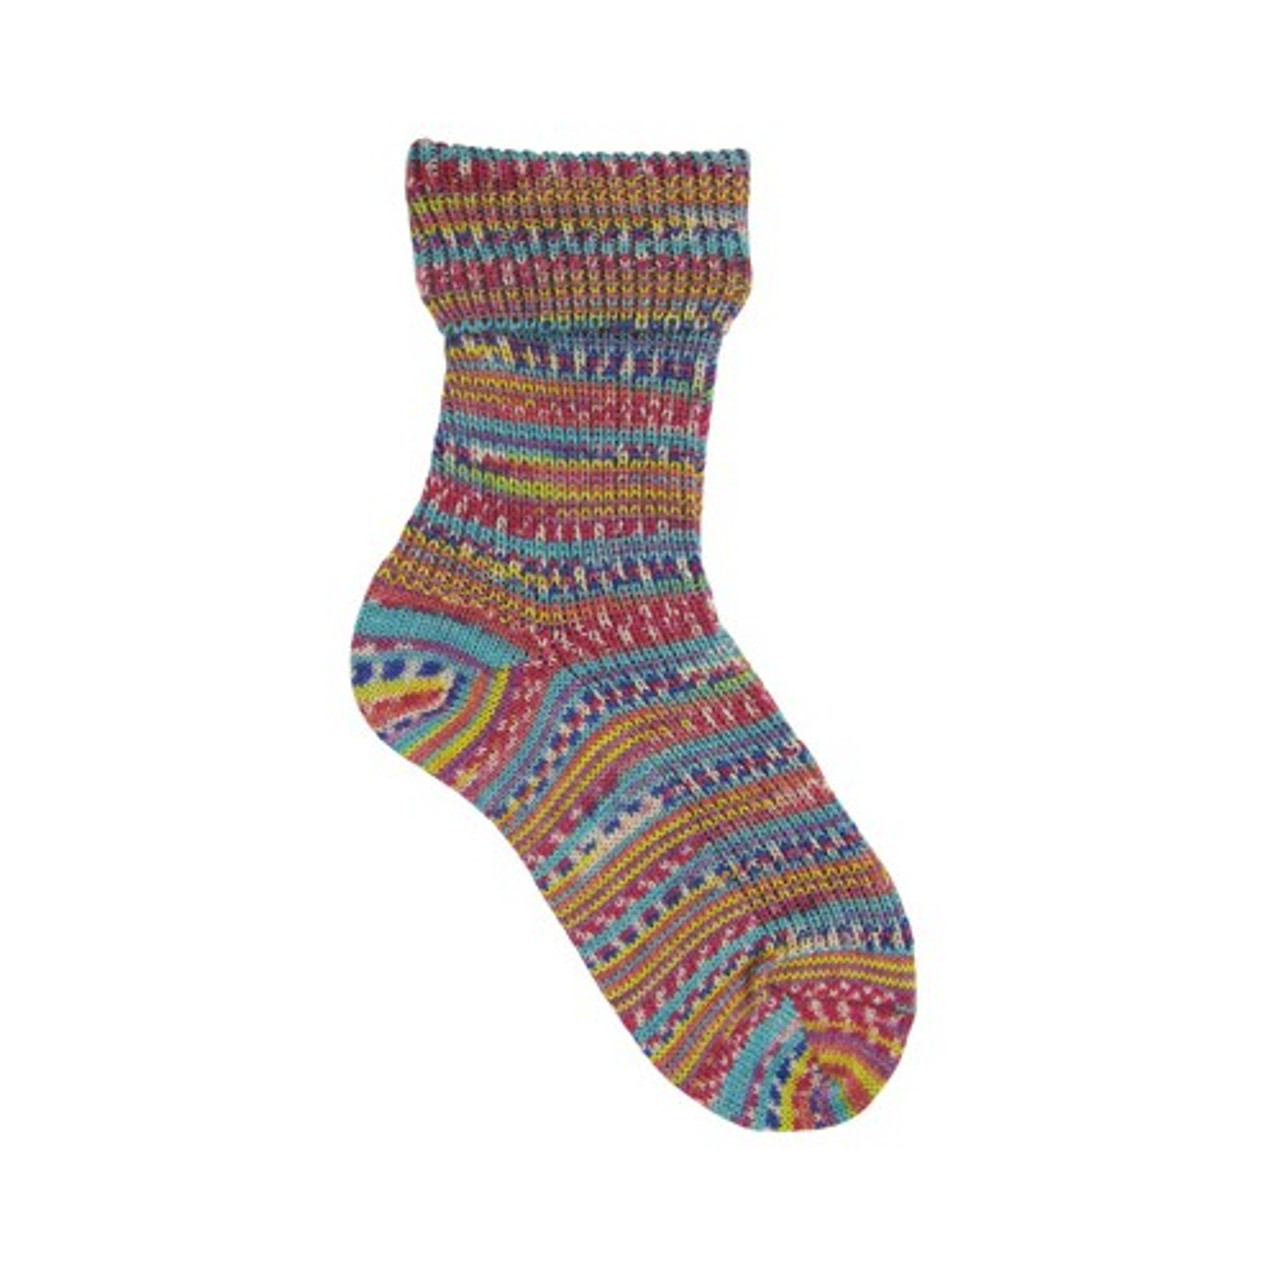 Opal Schafpate Sock Yarn by Viridian - Confectioner / Thelma (7952 ...